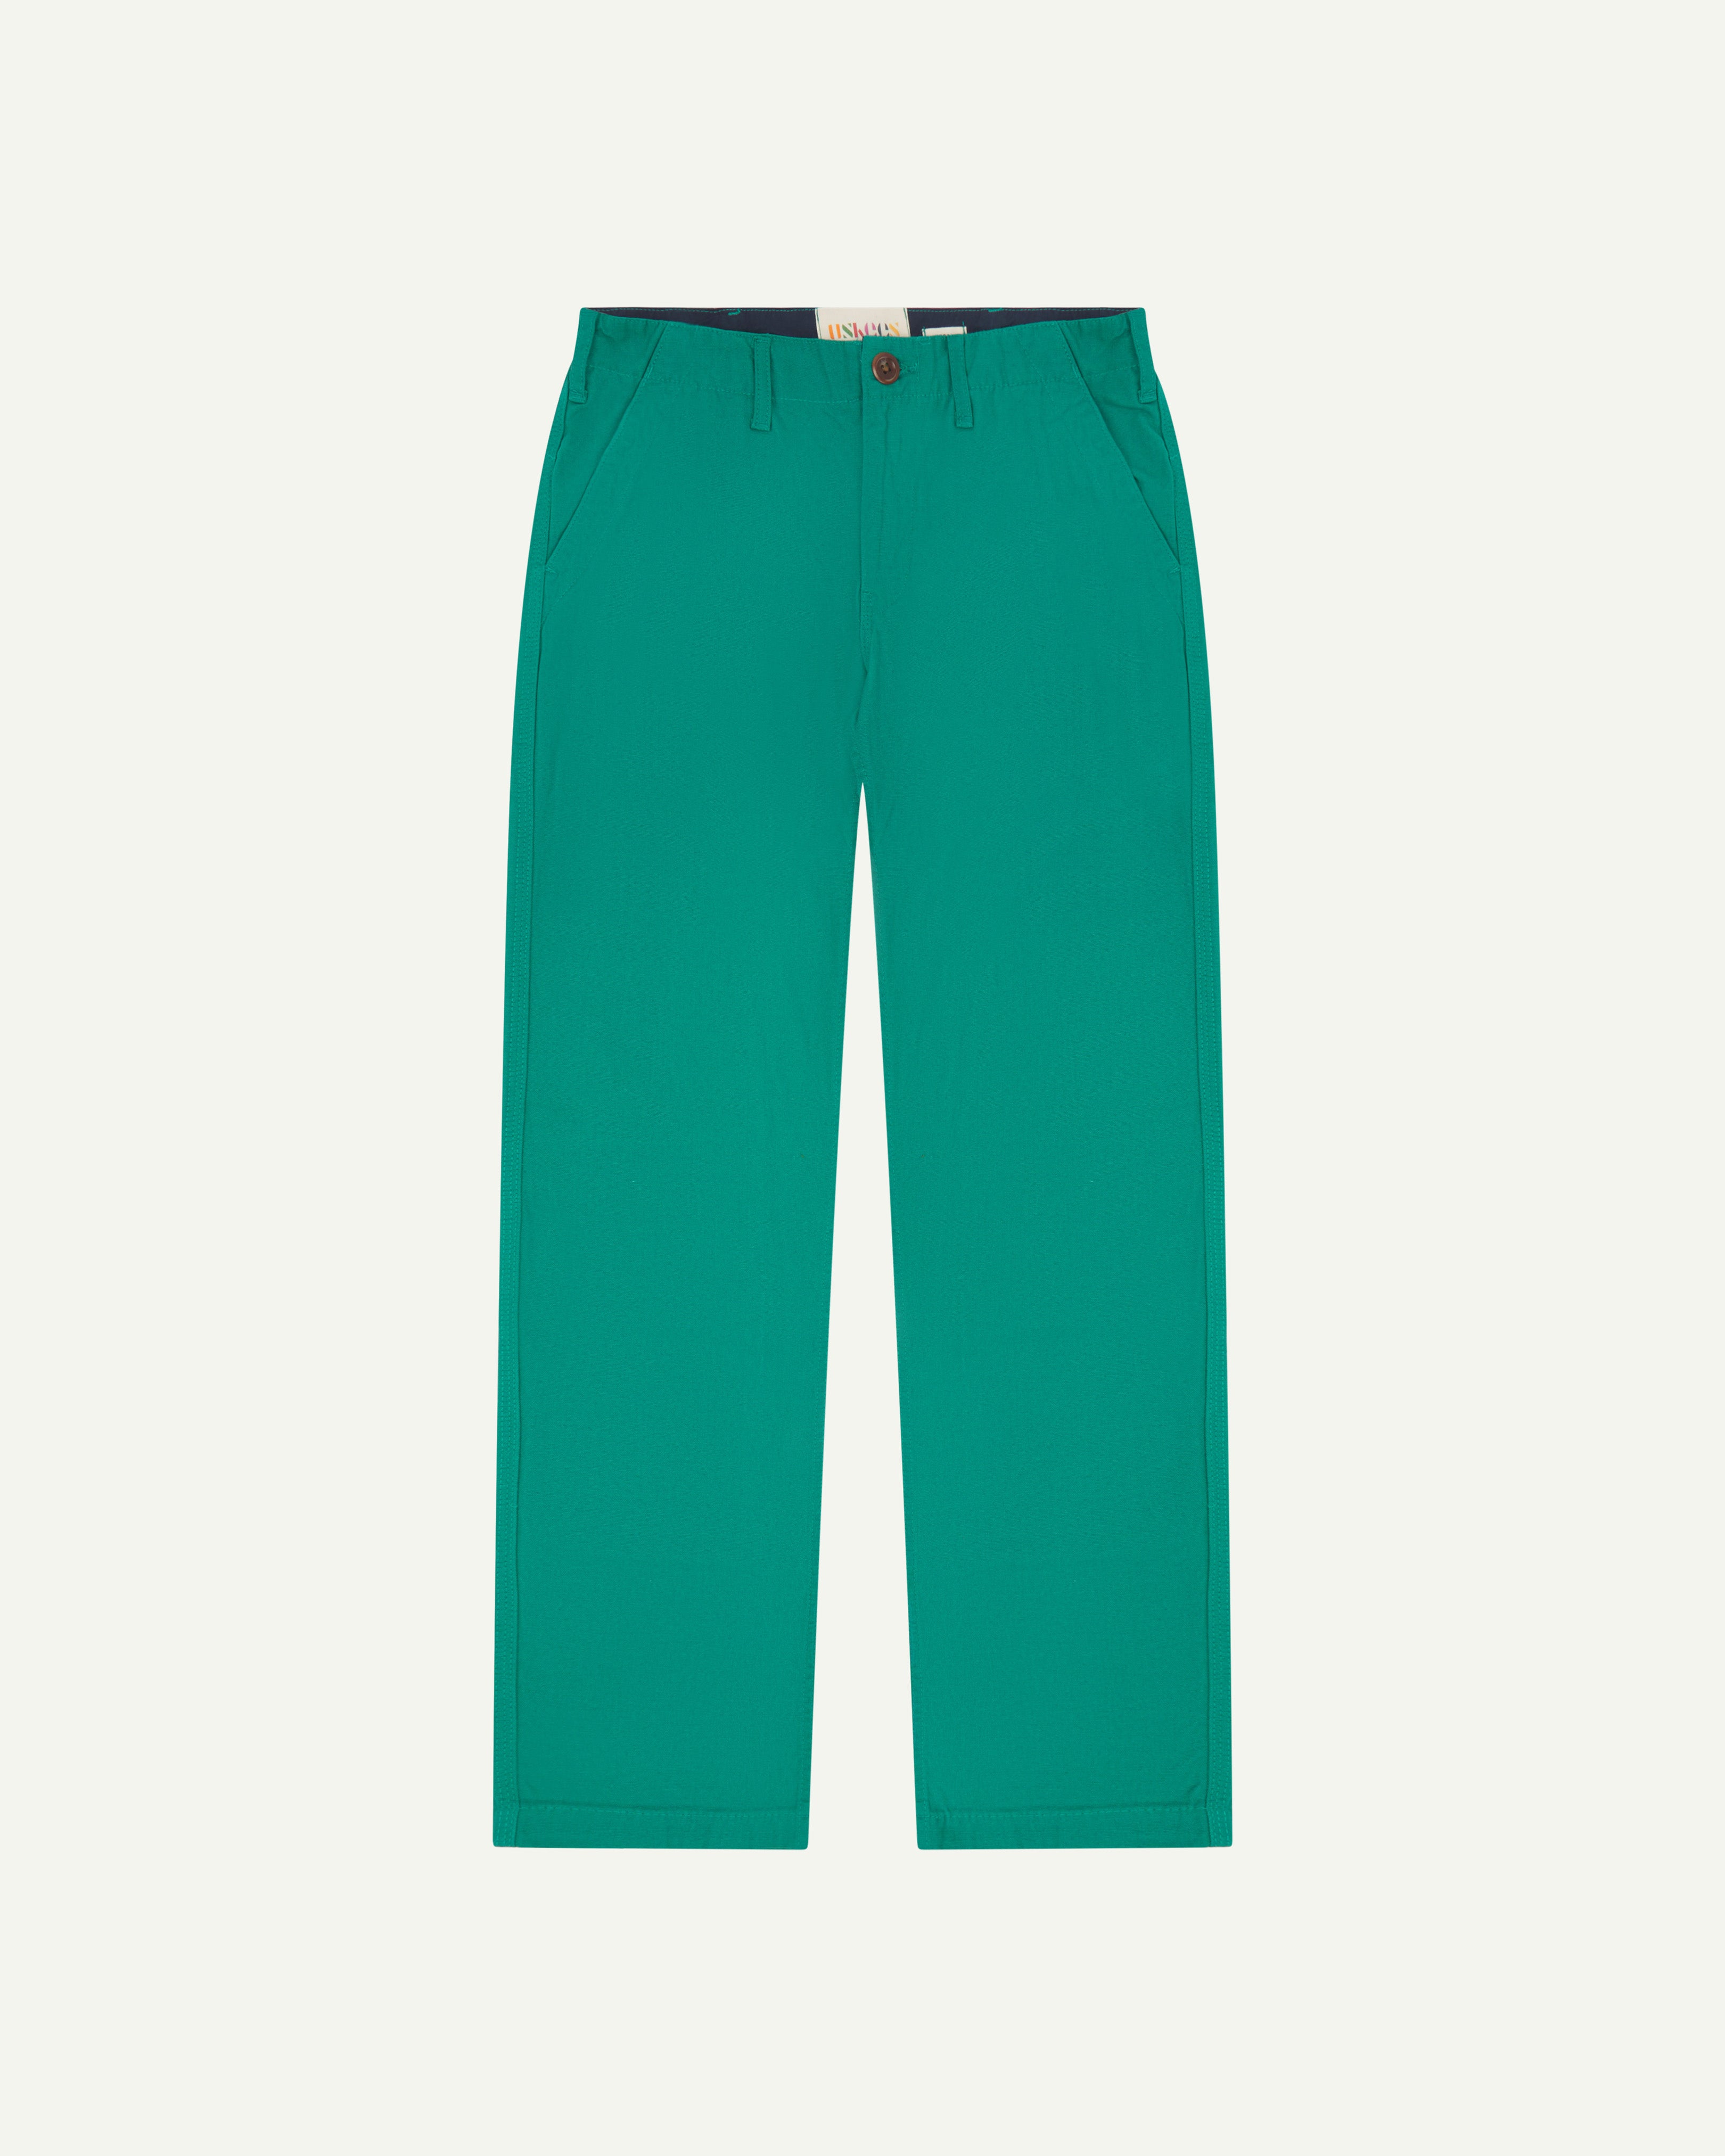 Flat view of #5005 Uskees men's organic cotton 'foam green' coloured trousers on white background.